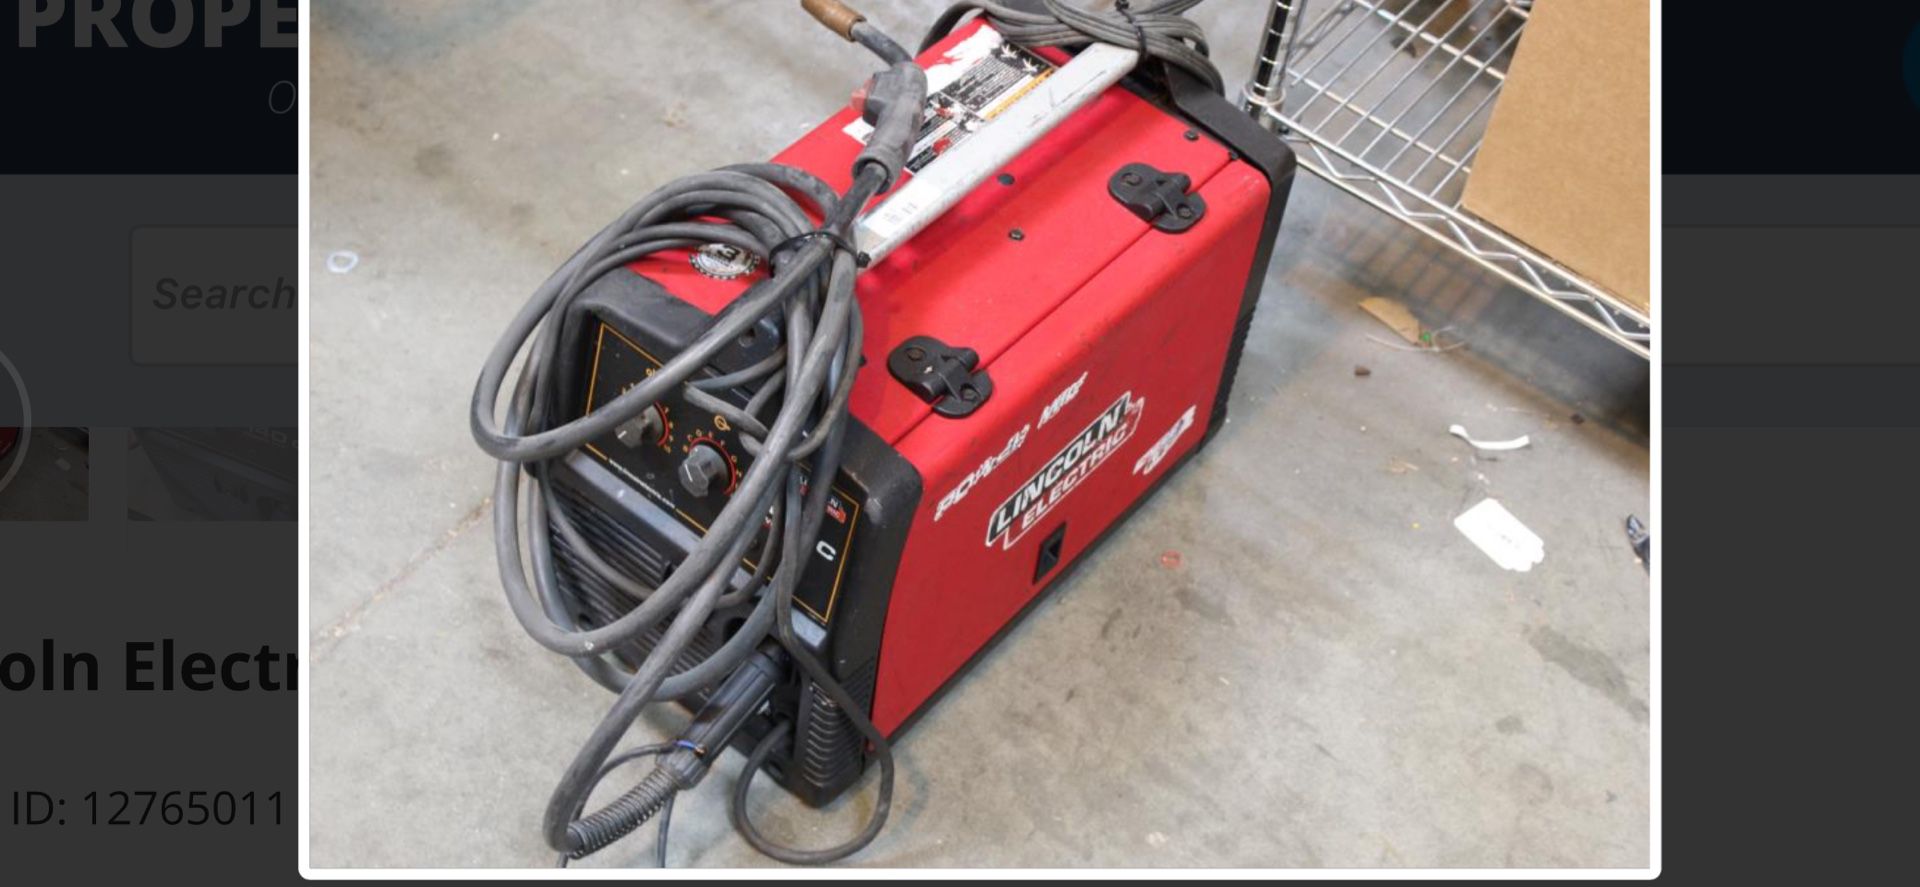 Lincoln Electric 140c Power Mig Welder